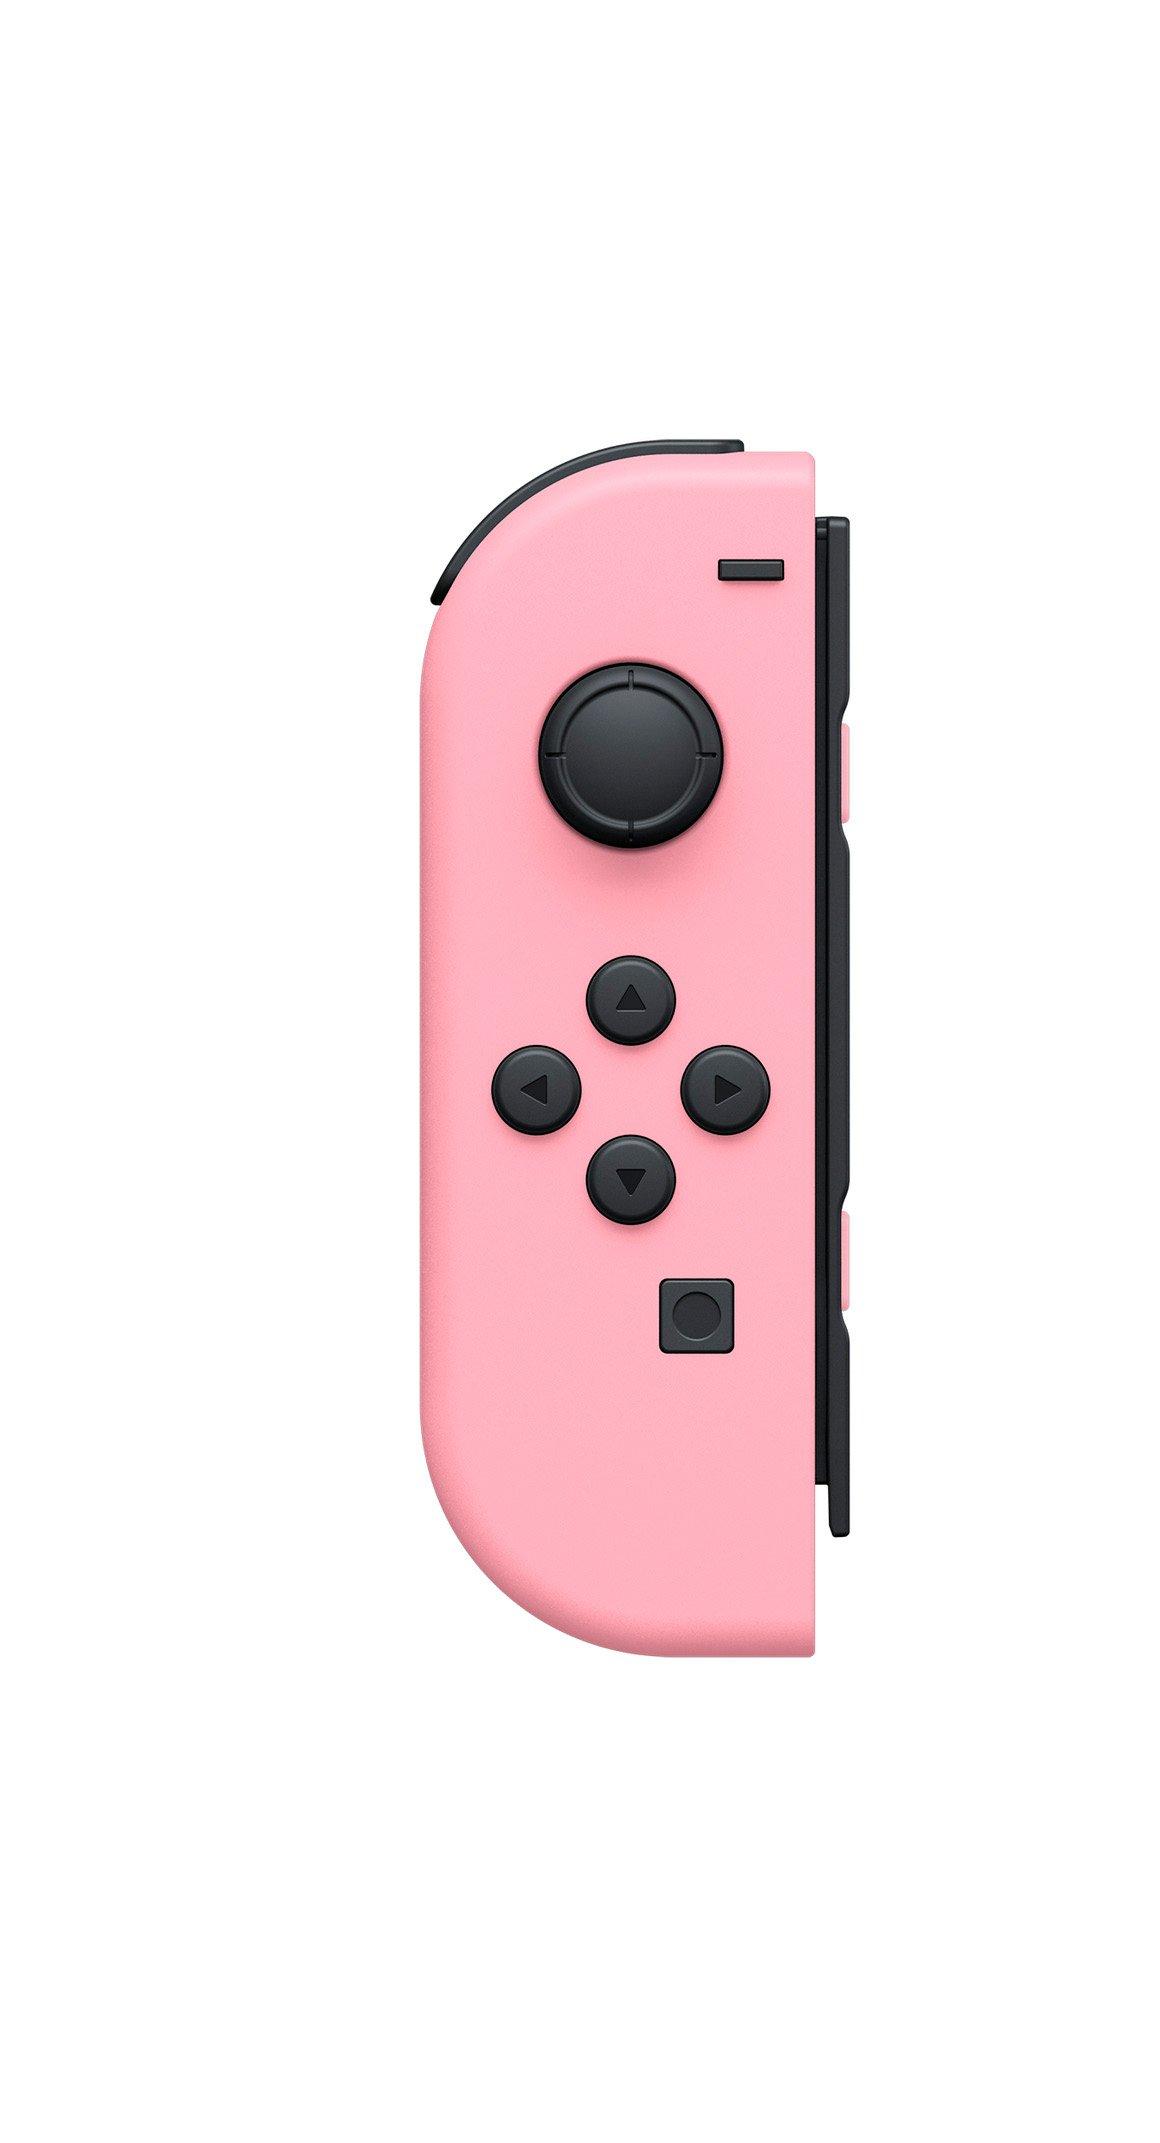 Pastel Joy-Cons for Nintendo Switch Are Now Available to Preorder - IGN